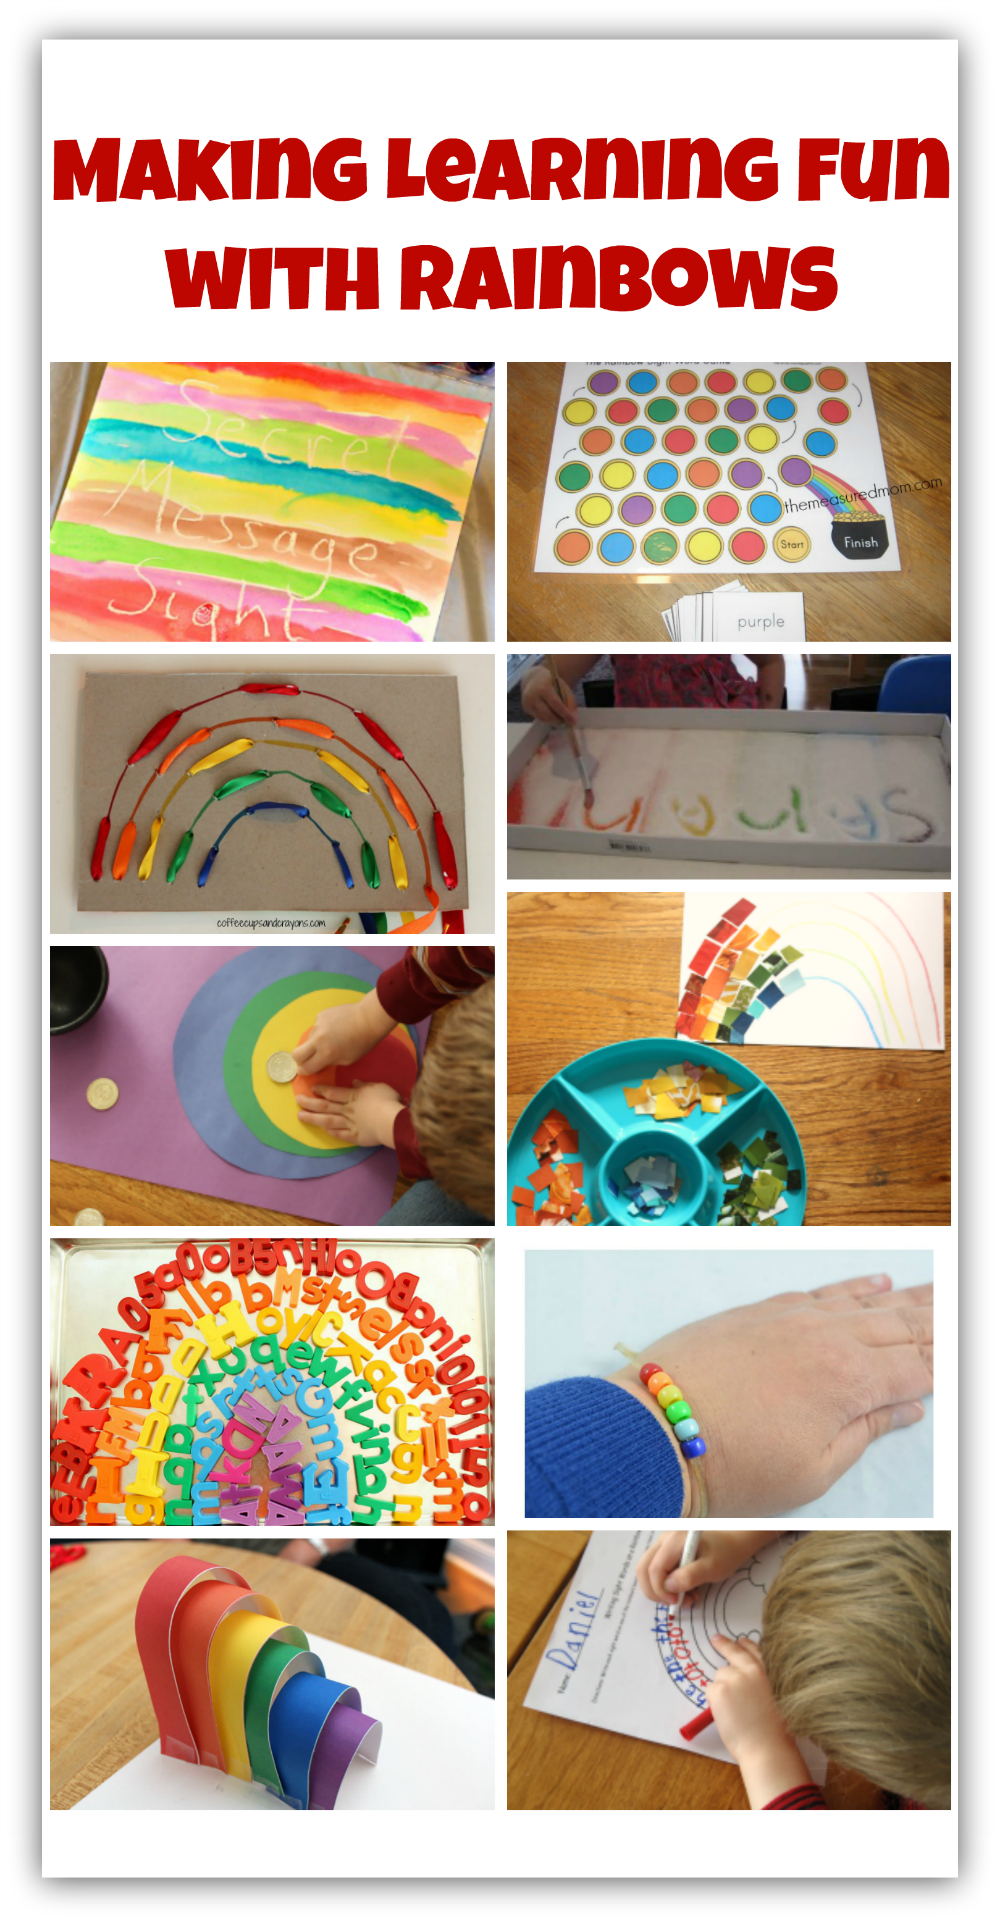 Making Learning Fun with Rainbows (title)